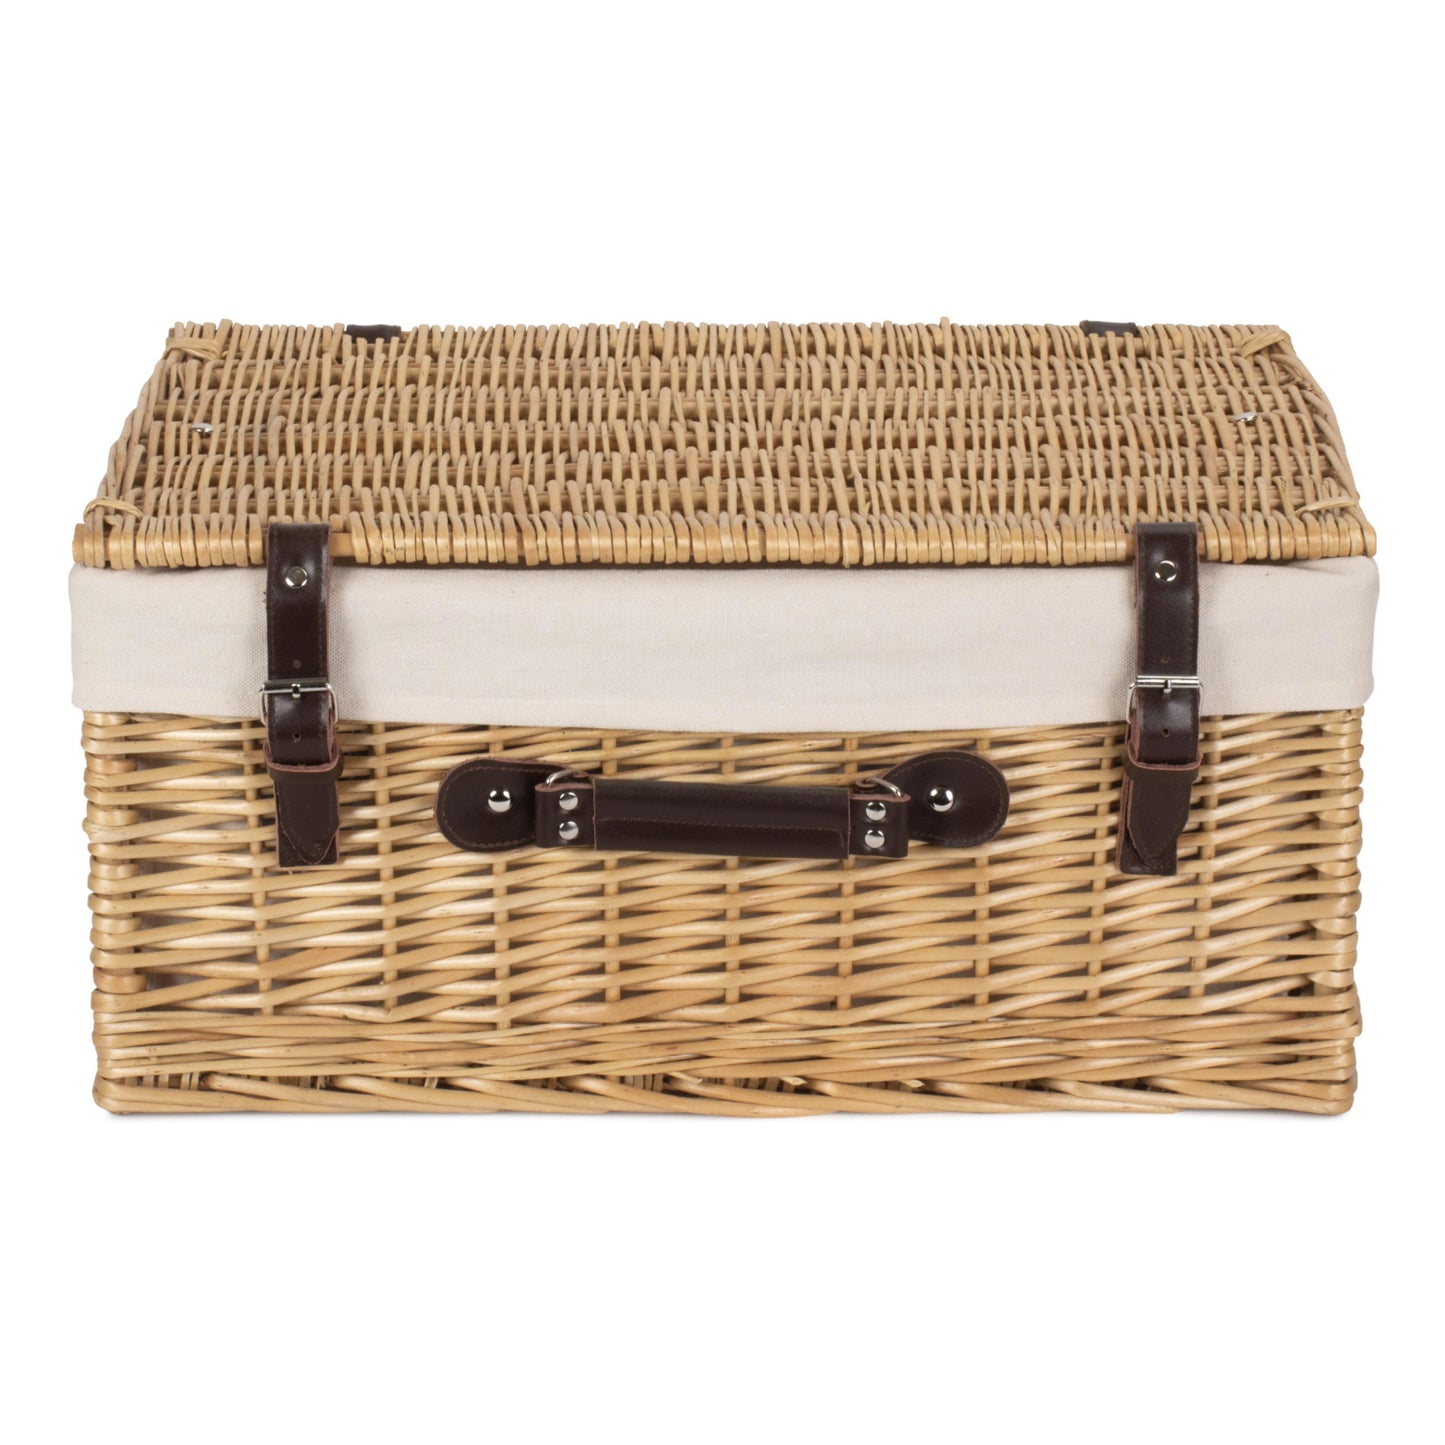 20 Inch Buff Hamper With White Lining